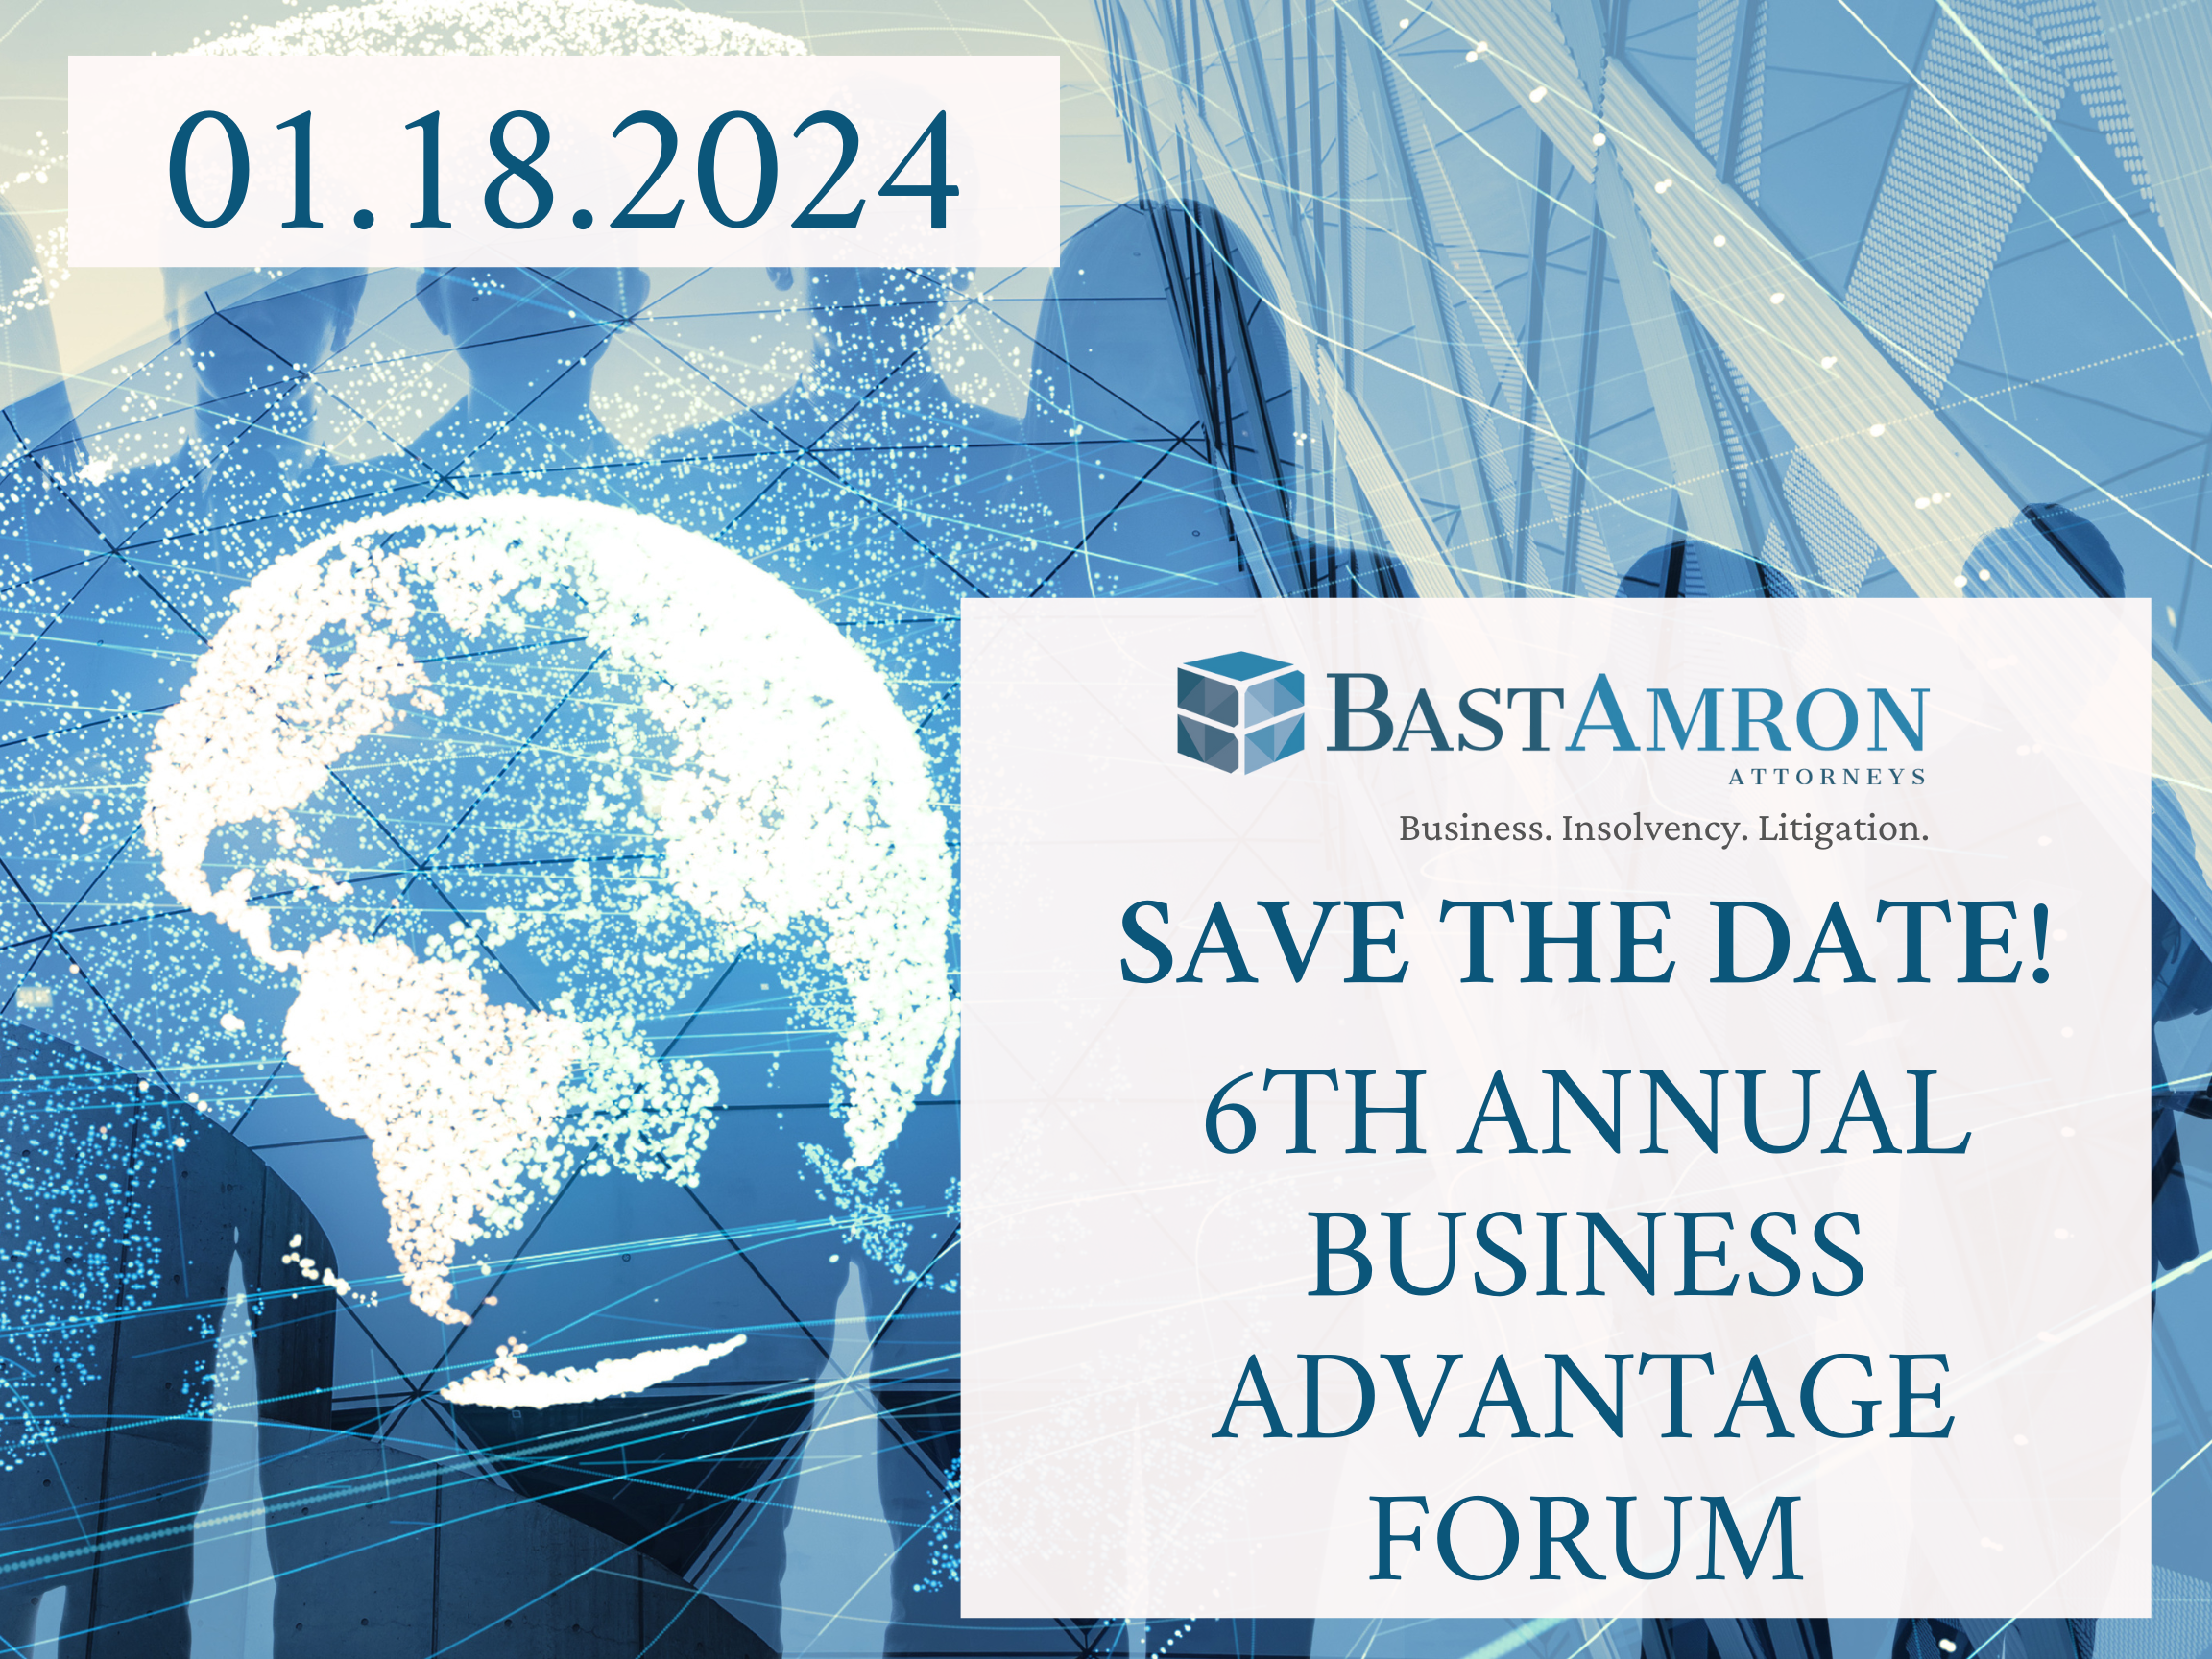 SAVE THE DATE: Bast Amron’s 6th Annual Business Advantage Forum! January 18, 2024